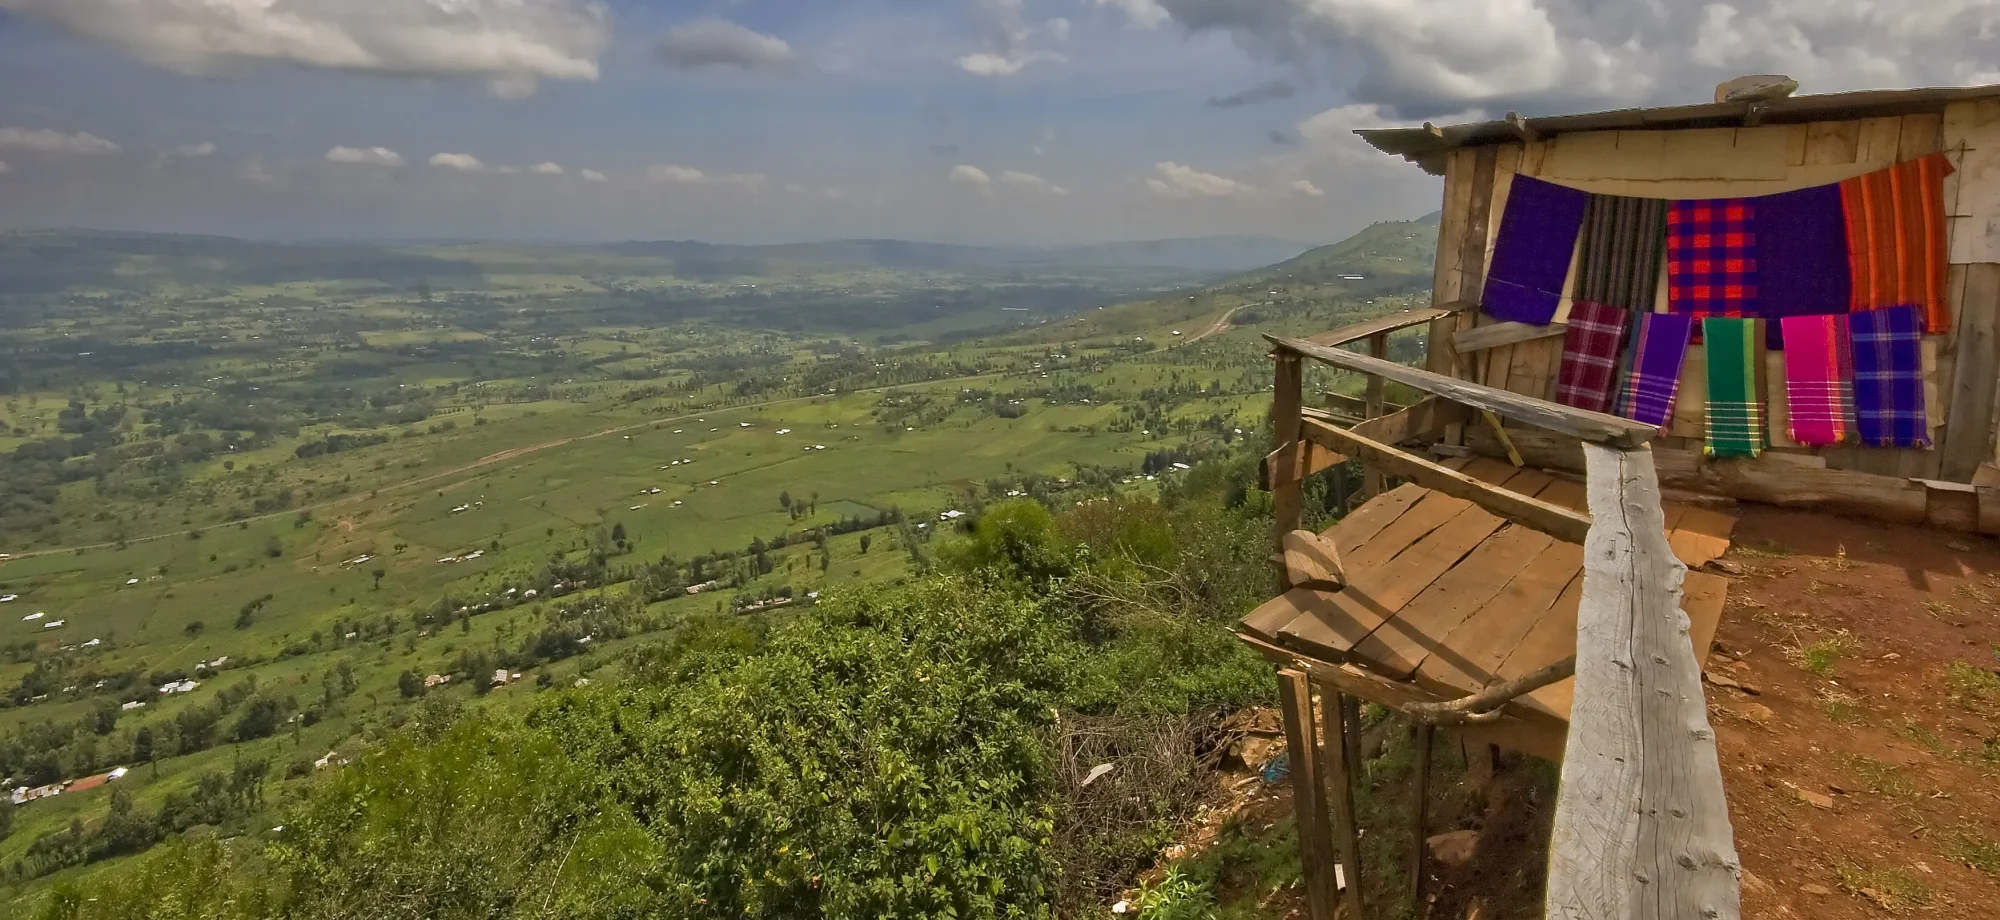 A lookout point gazes over the rolling hills of the Great Rift Valley during a sunny day